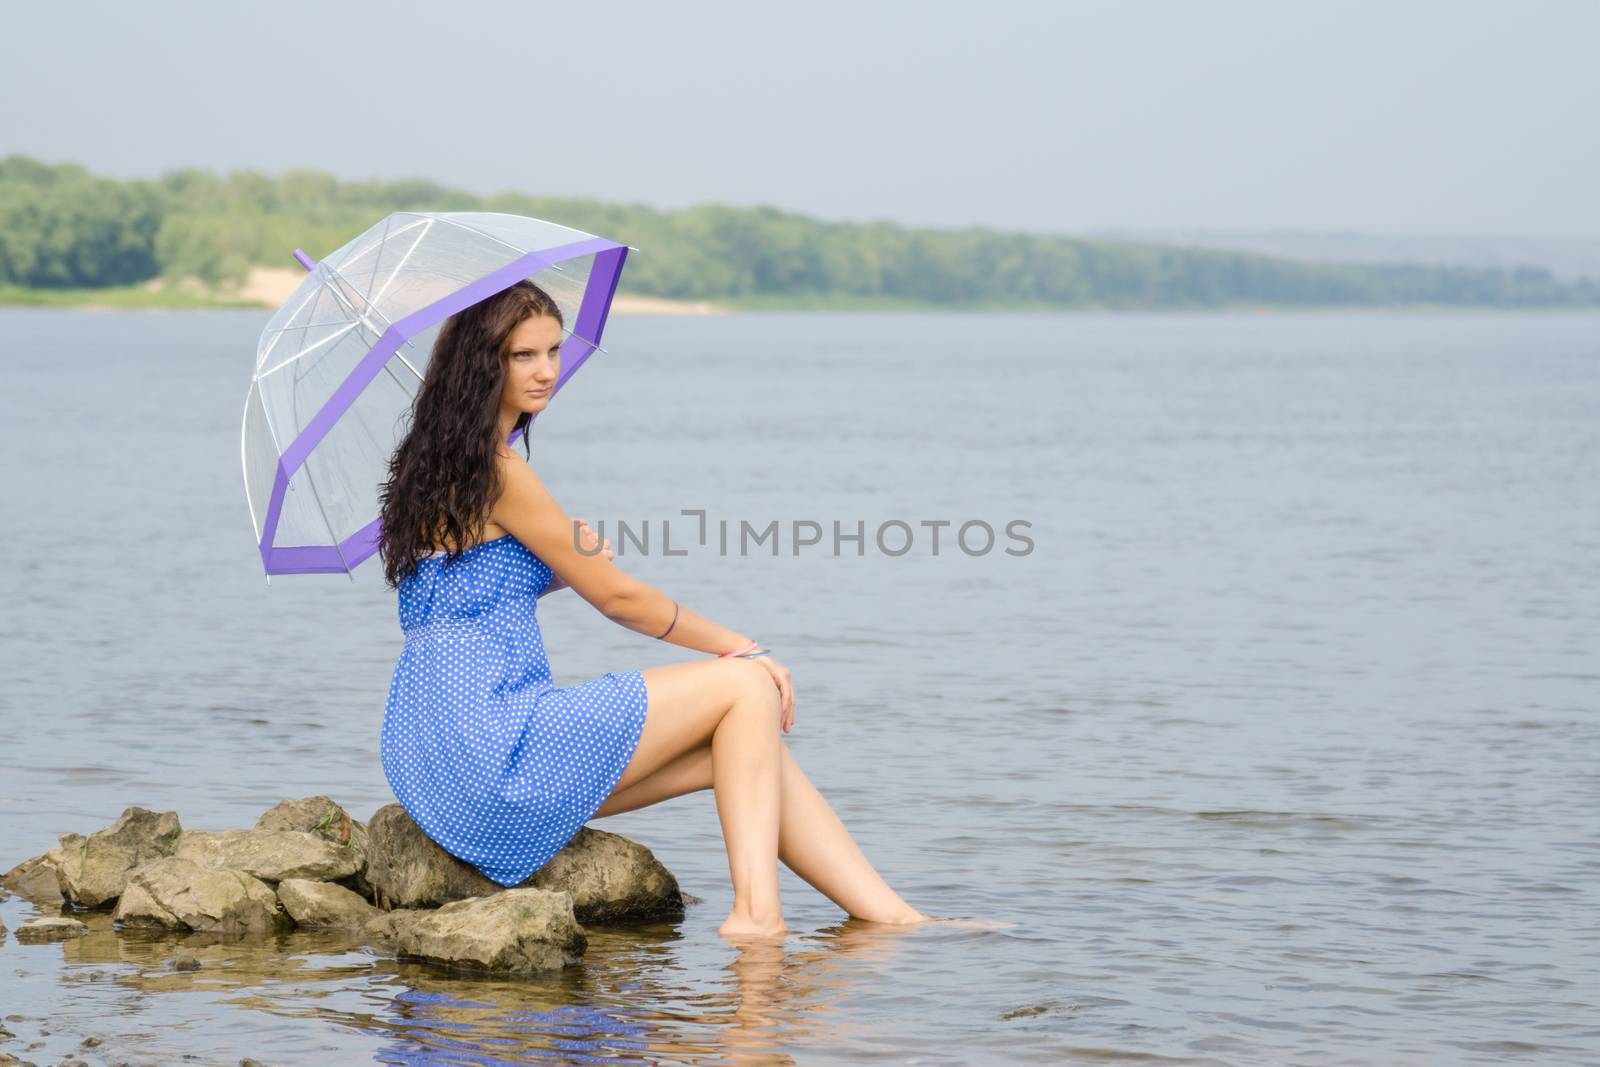 Lonely sad young woman with an umbrella sits on a rock by the river by Madhourse